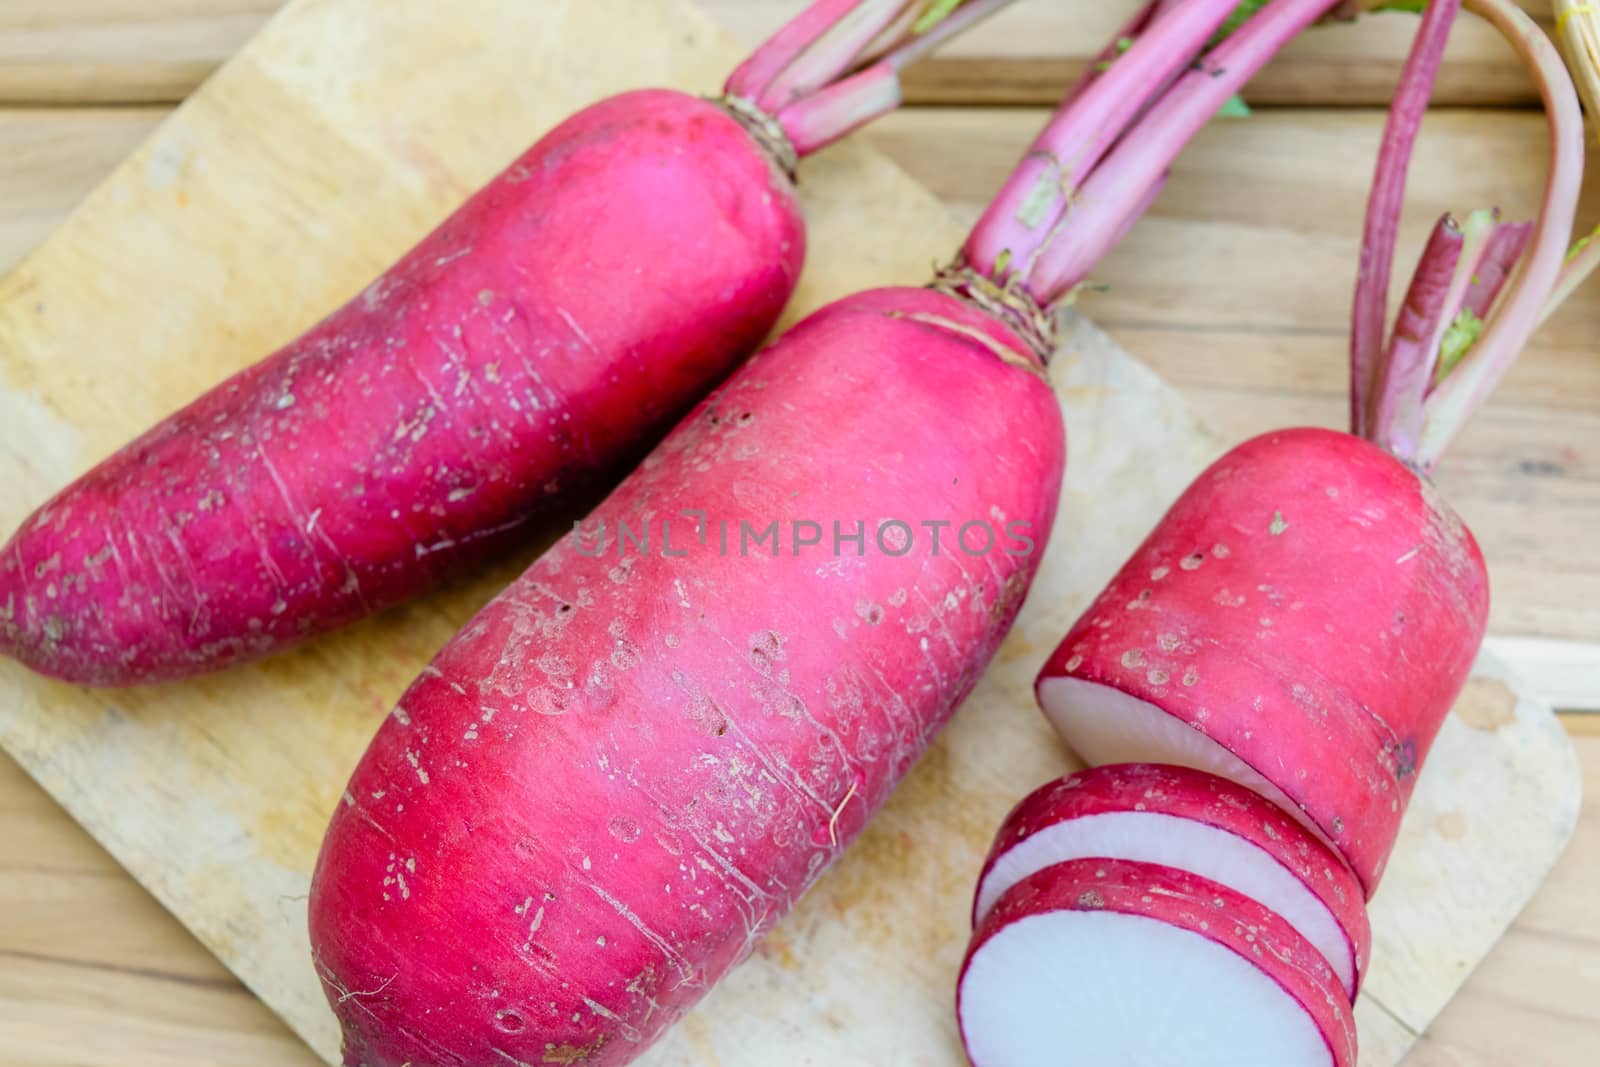 Red radish on wooden table